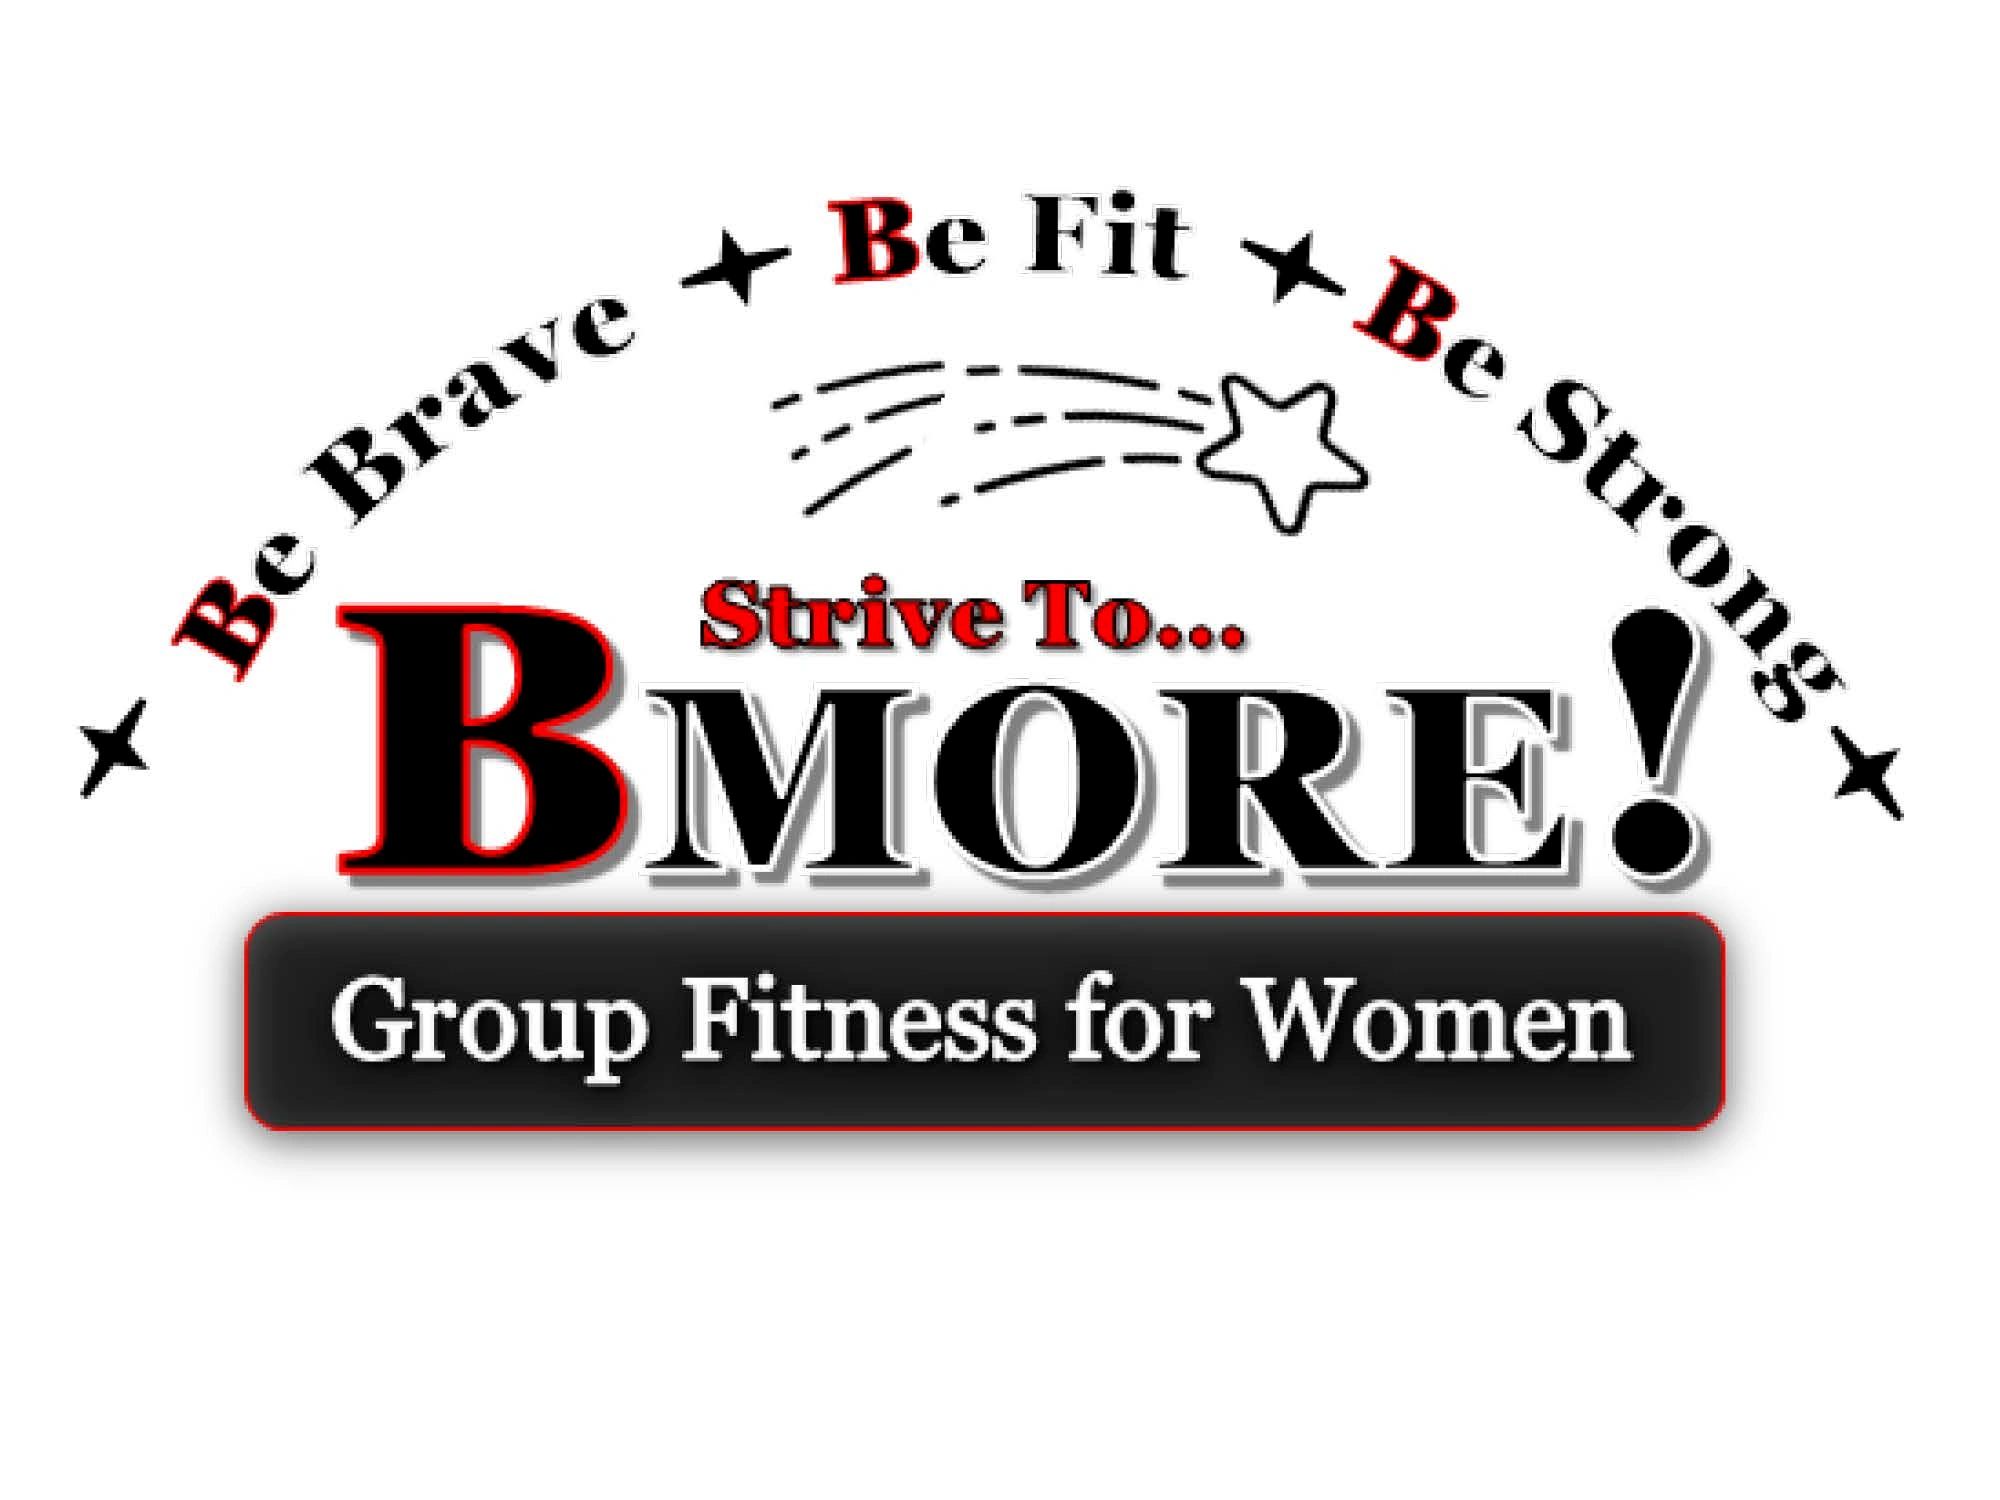 Women Only Group Fitness Classes